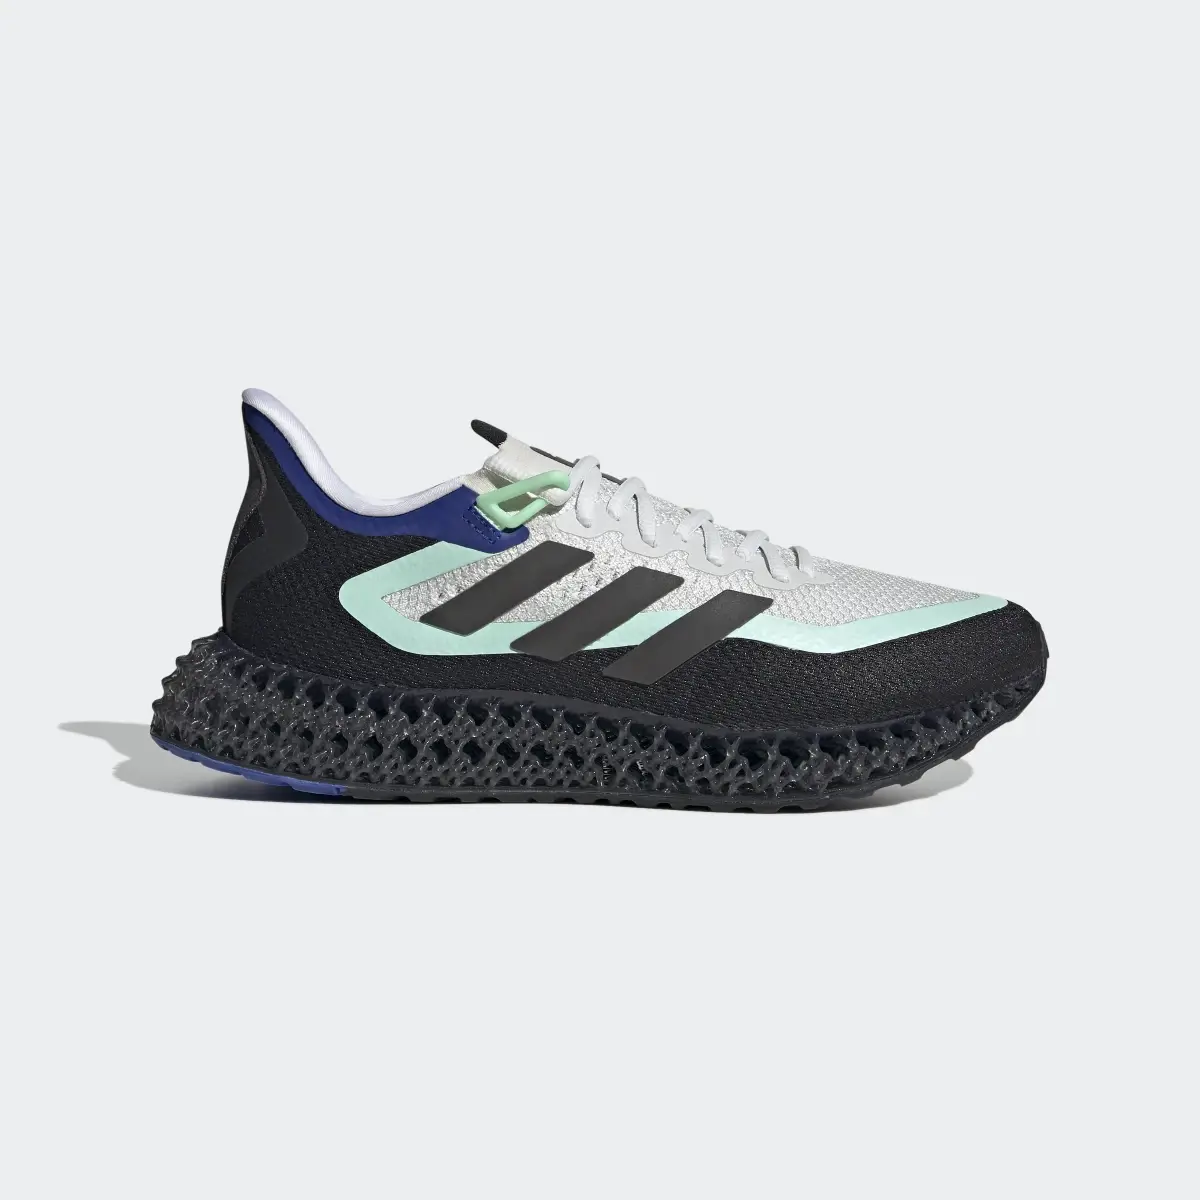 Adidas 4DFWD Running Shoes. 2